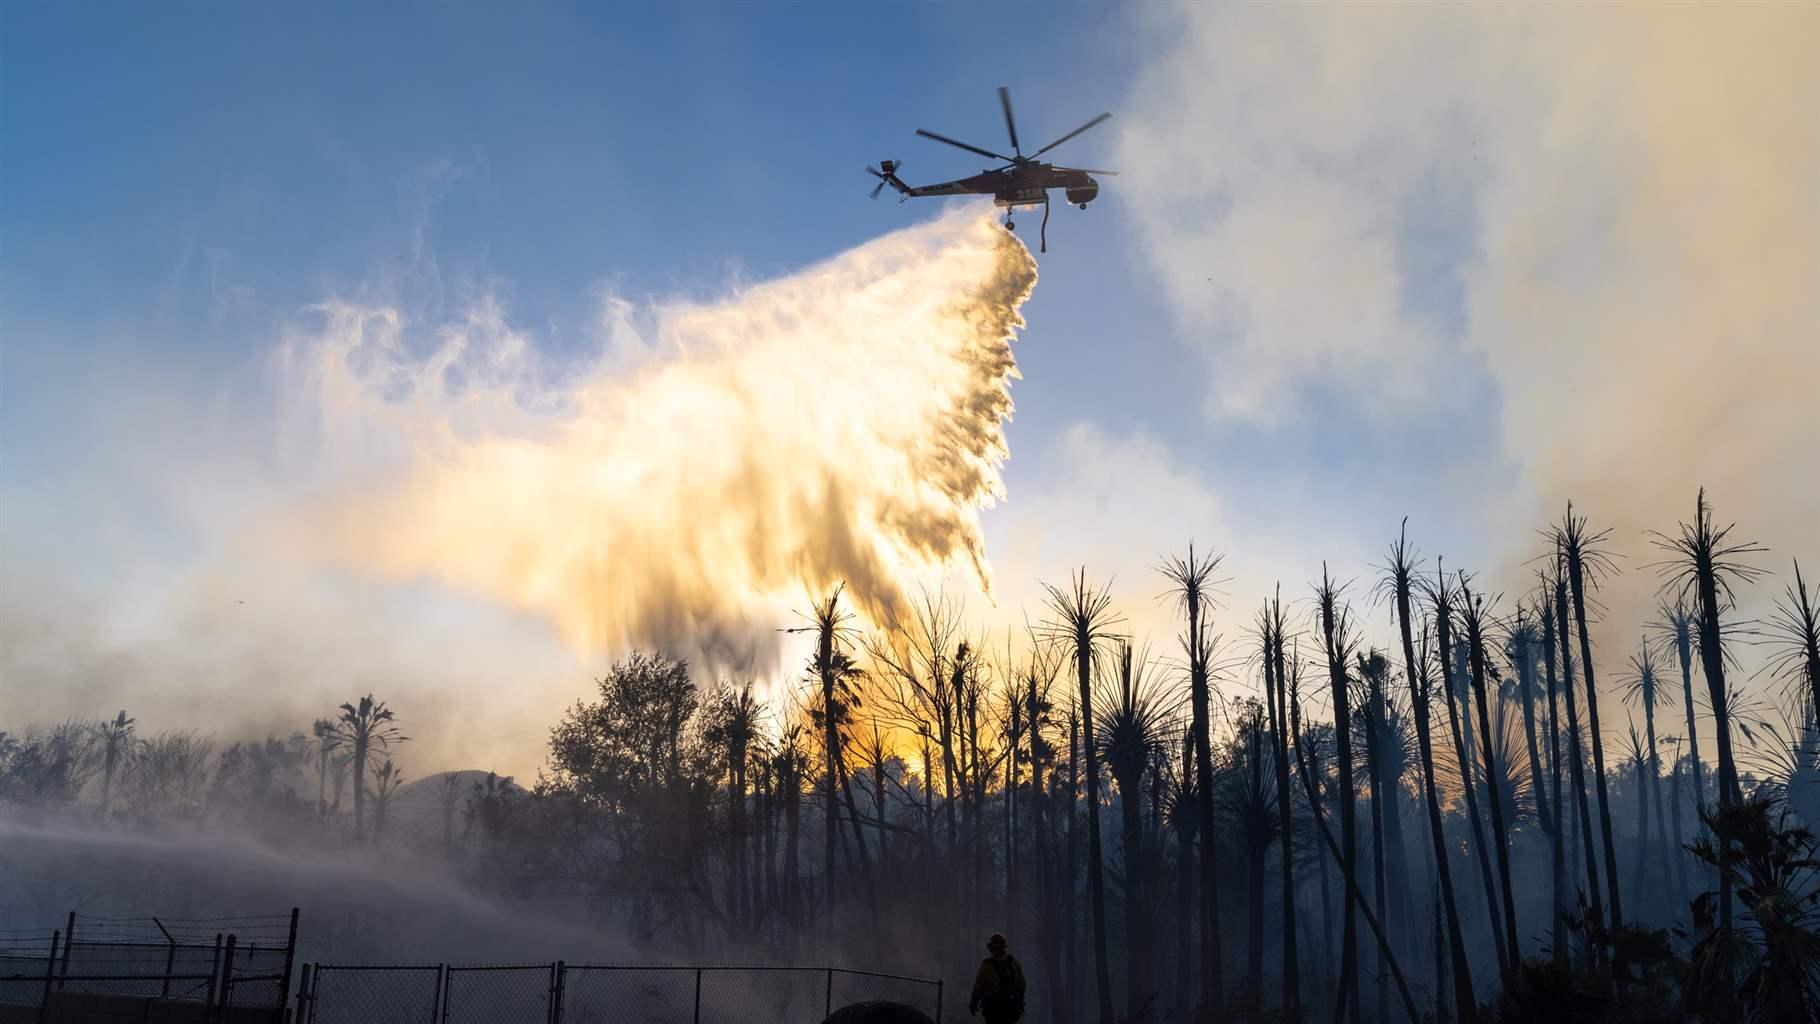   A helicopter drops a large plume of water on a smoldering wildfire, with scorched trees, some chain-link fencing, and the silhouette of a firefighter visible in the foreground. The plume is refracting light from the sun, which sits behind a small mountain on the horizon beneath a cloudless sky.